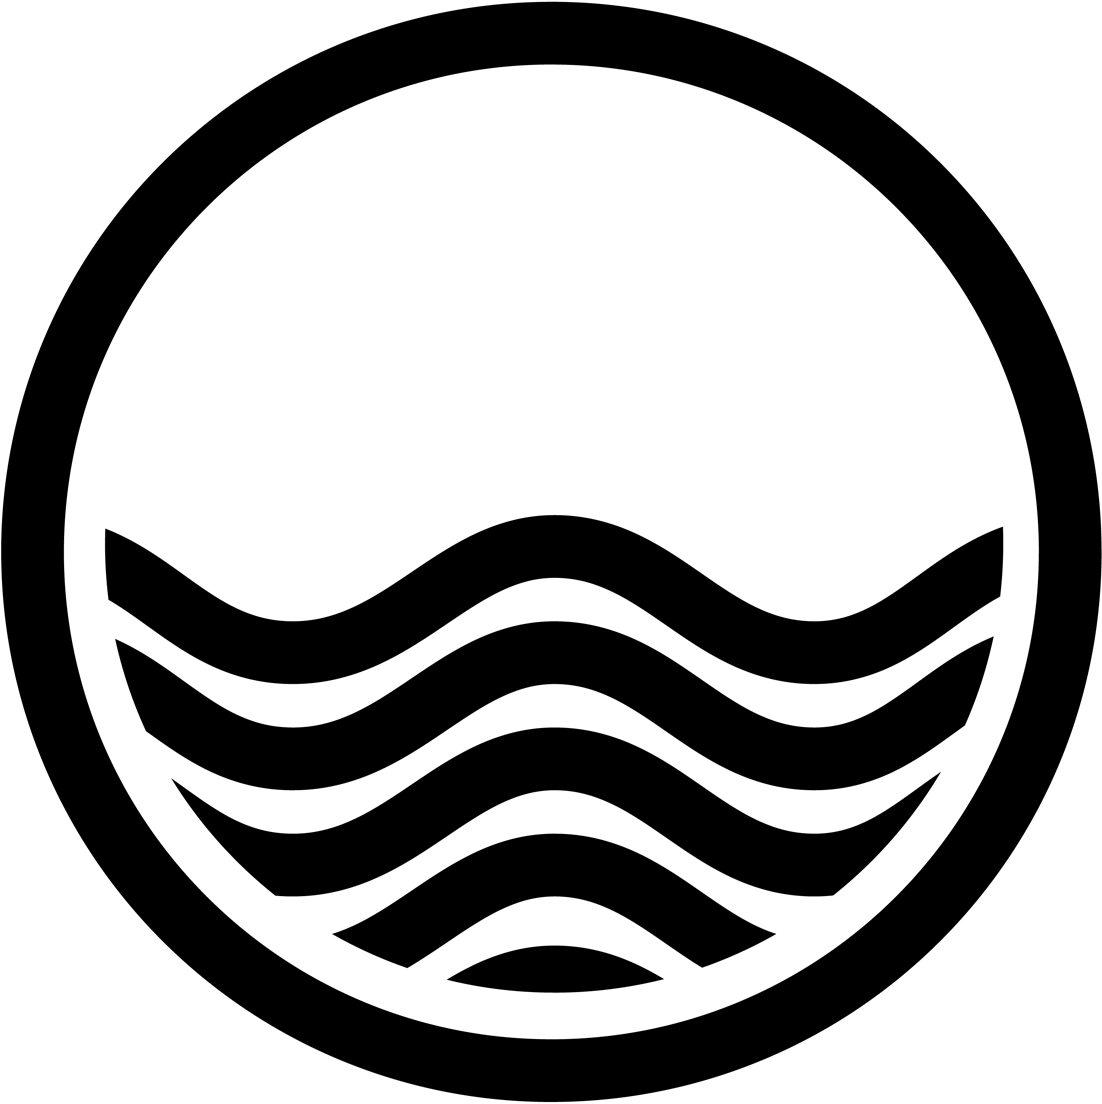 Black and White Water Logo - Png library download black and white symbol water logo - RR collections